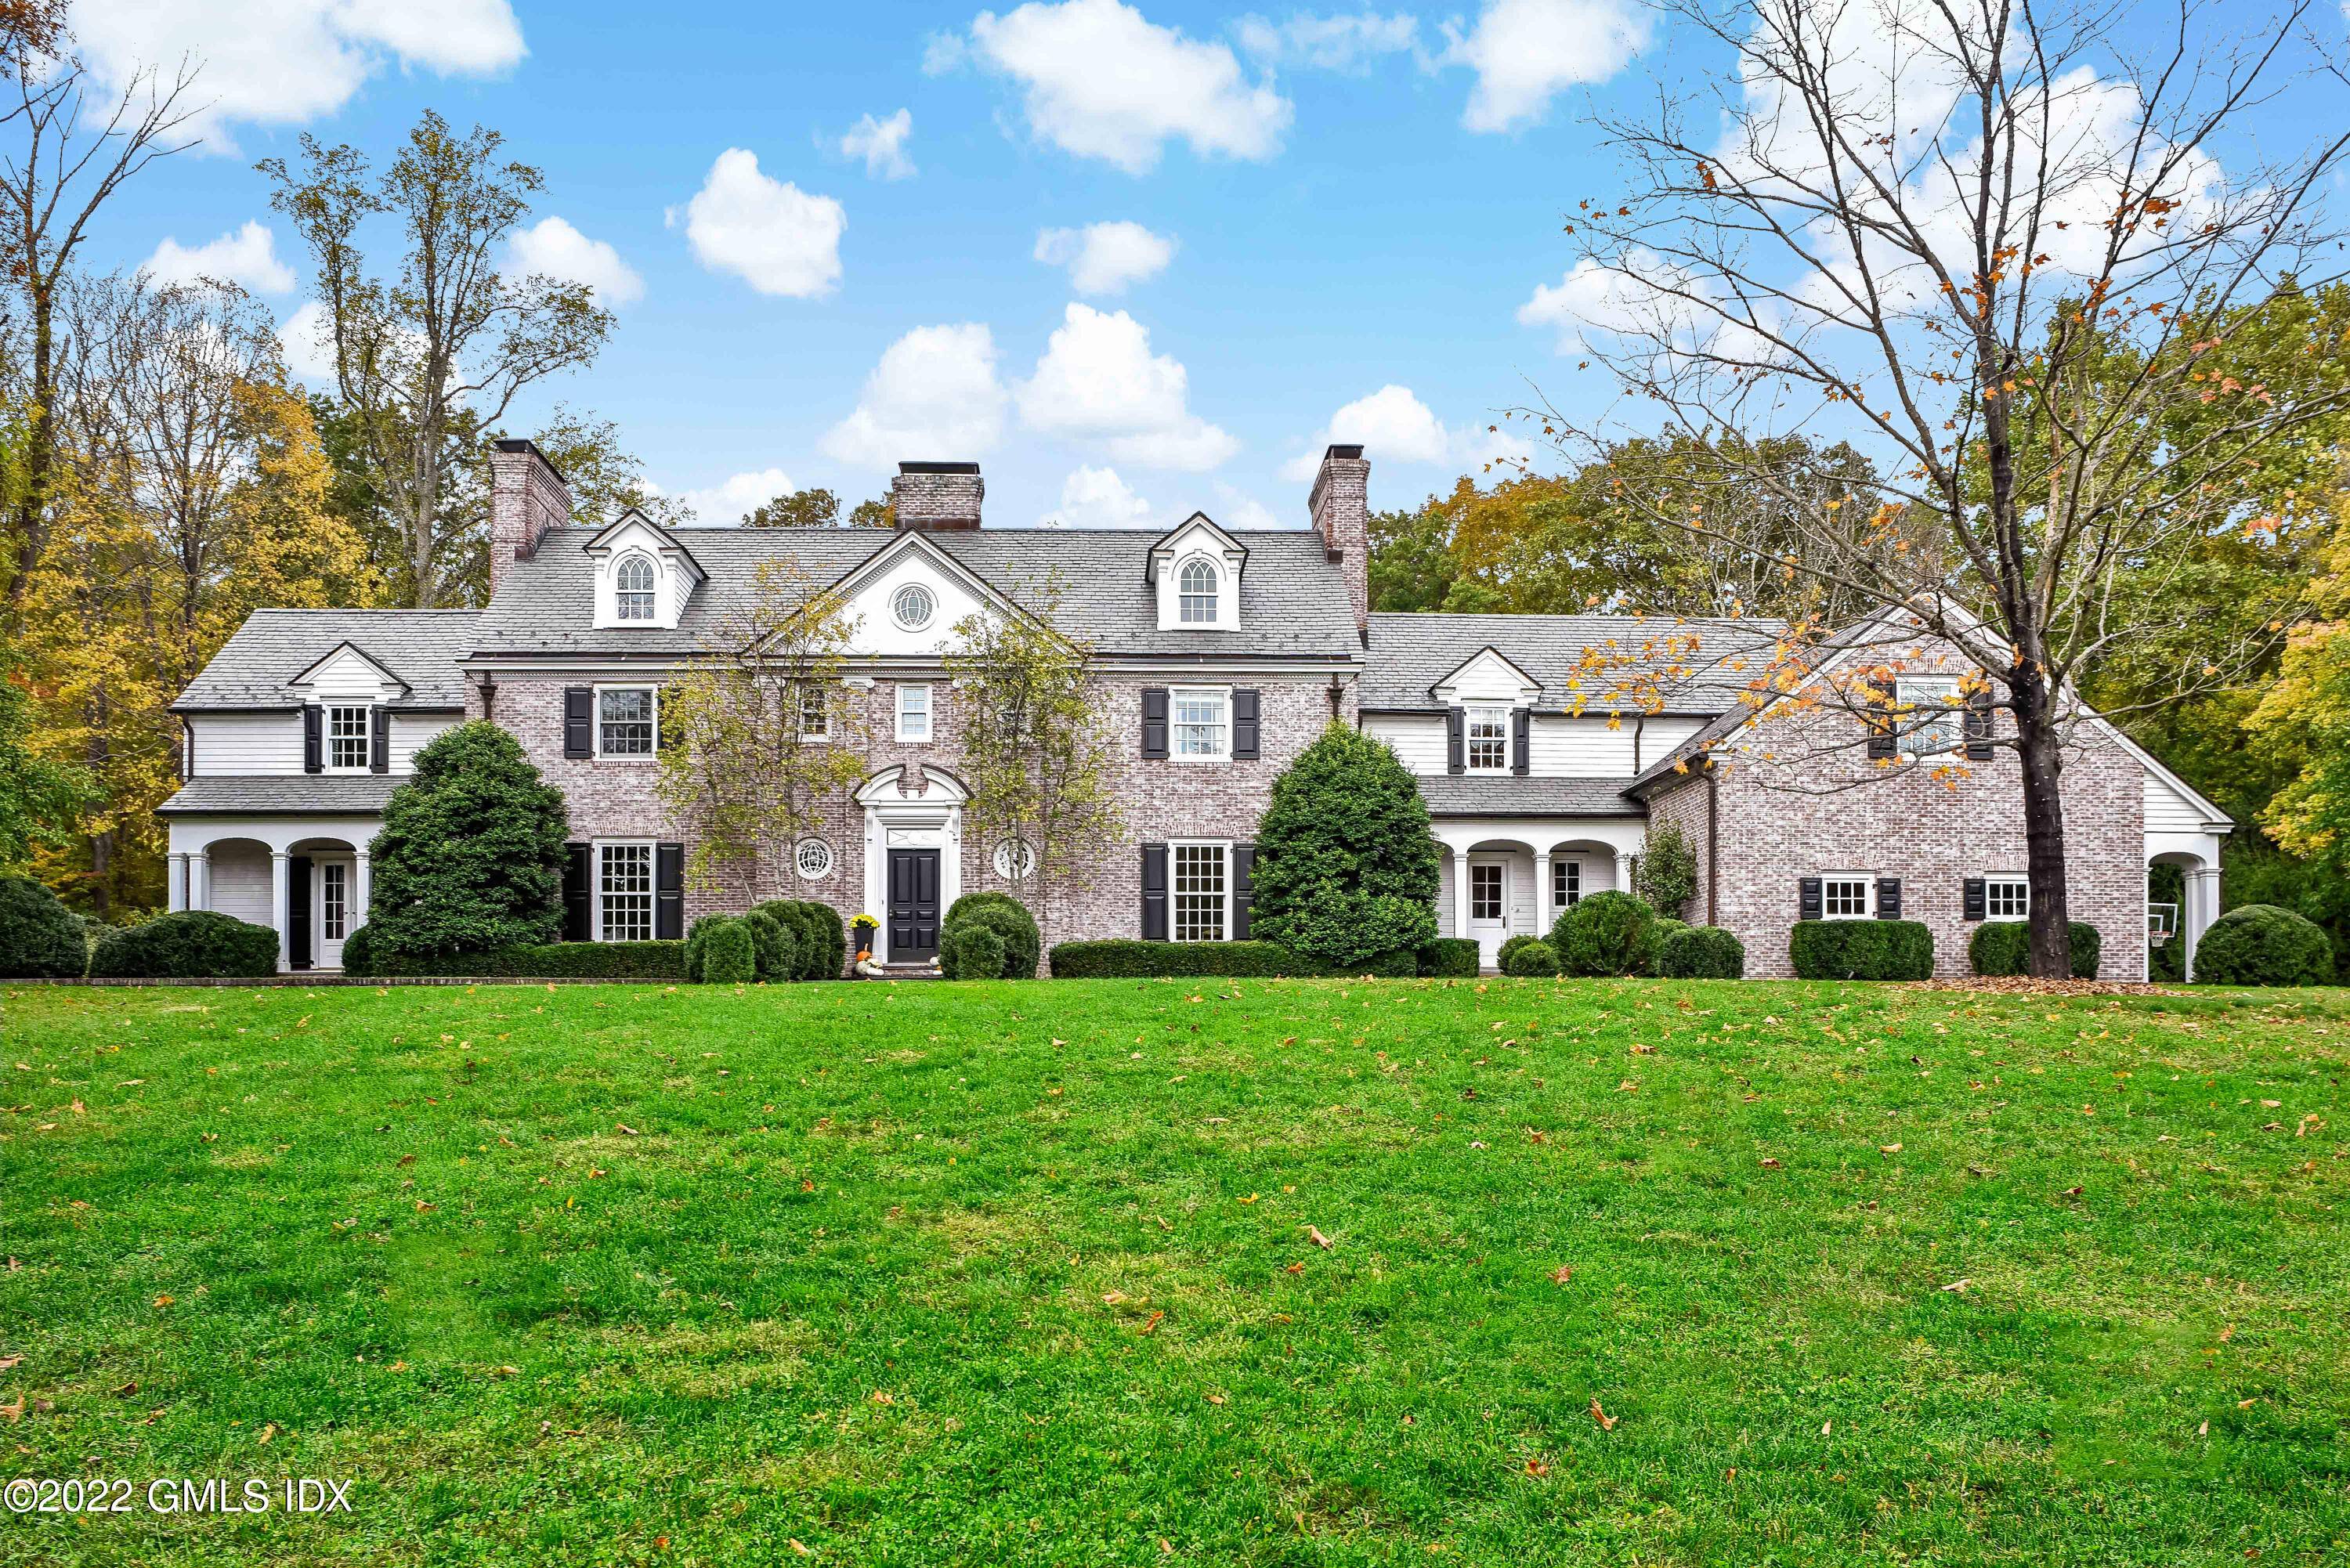 Located on one of New Canaan's most desirable West side streets is this beautiful brick Georgian colonial blends today's modern amenities with the charm and character of yesteryear.